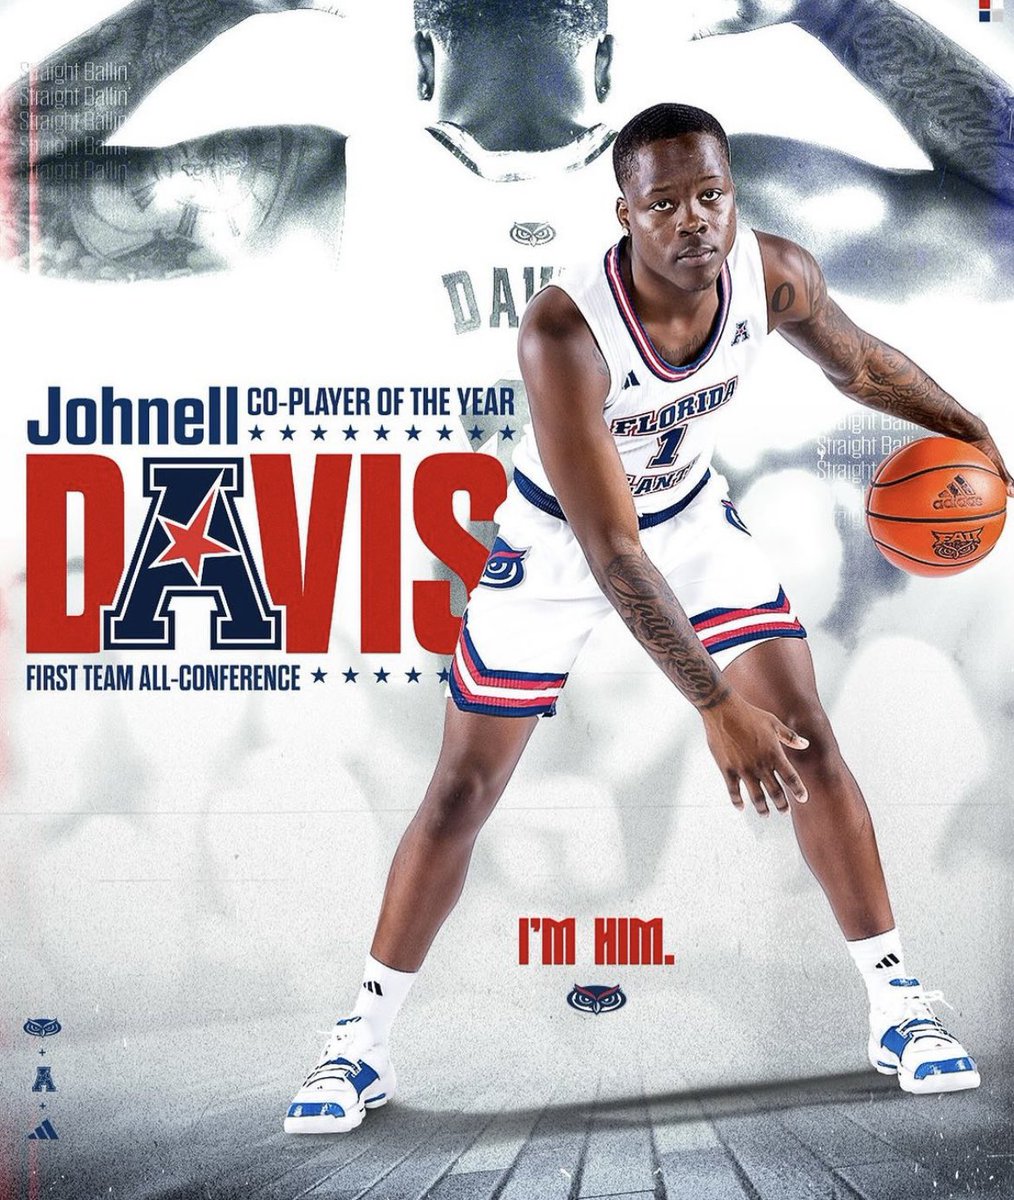 Indiana native Johnell Davis was named the Co-AAC Player of the Year and First Team All-Conference 👏 Davis avg 18.2 PPG, while shooting 48% from the field, and 6 RPG (most among AAC guards). @KOBNelly